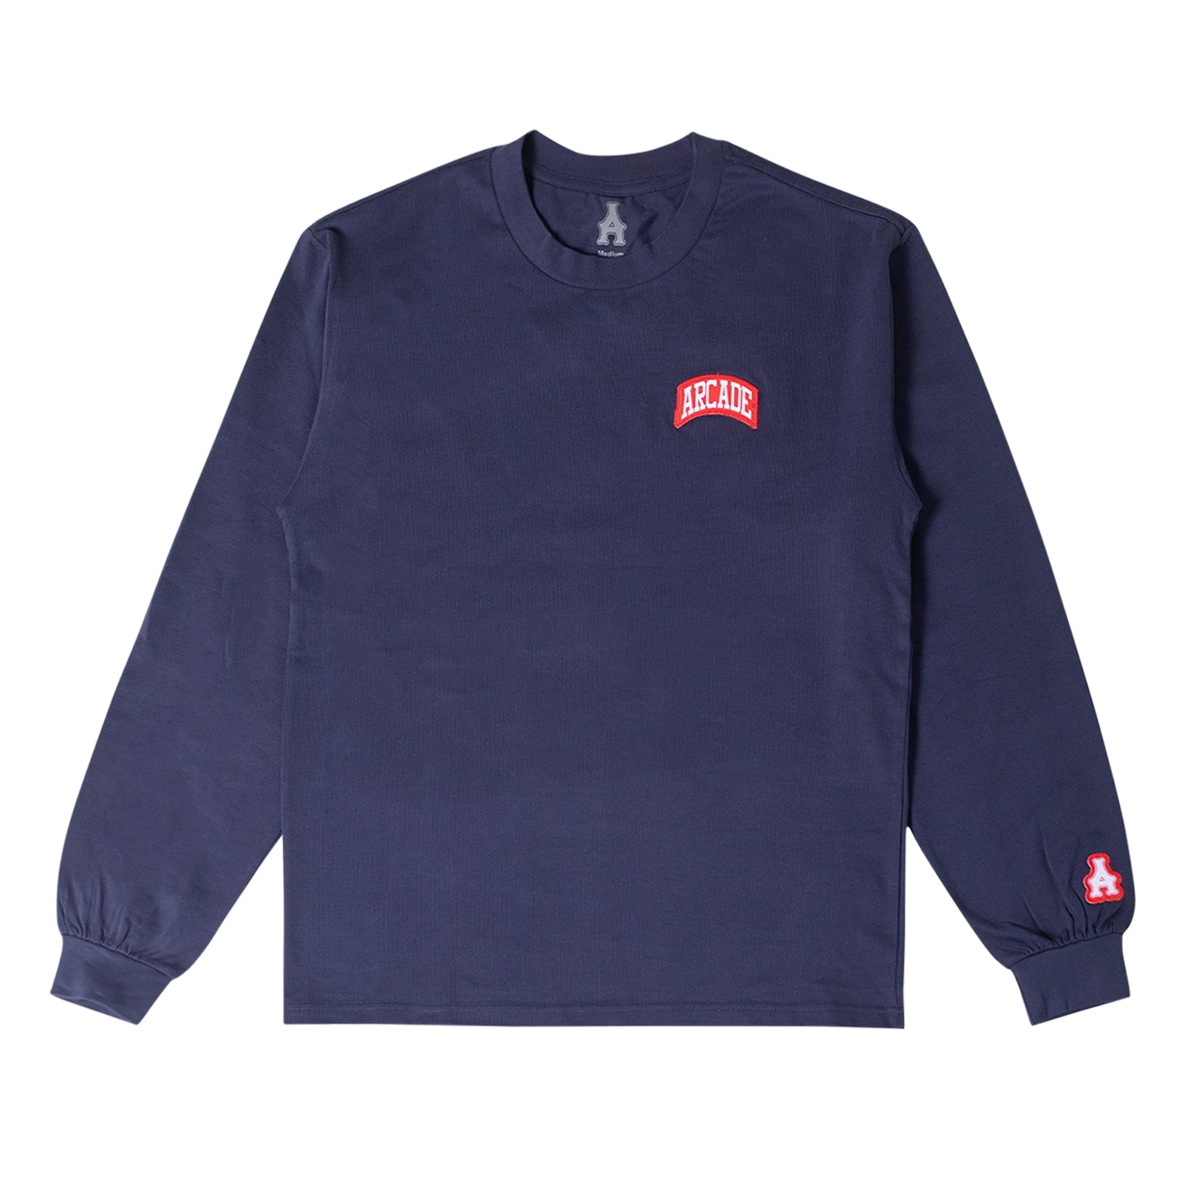 Arch Patch L/S Tee - Navy